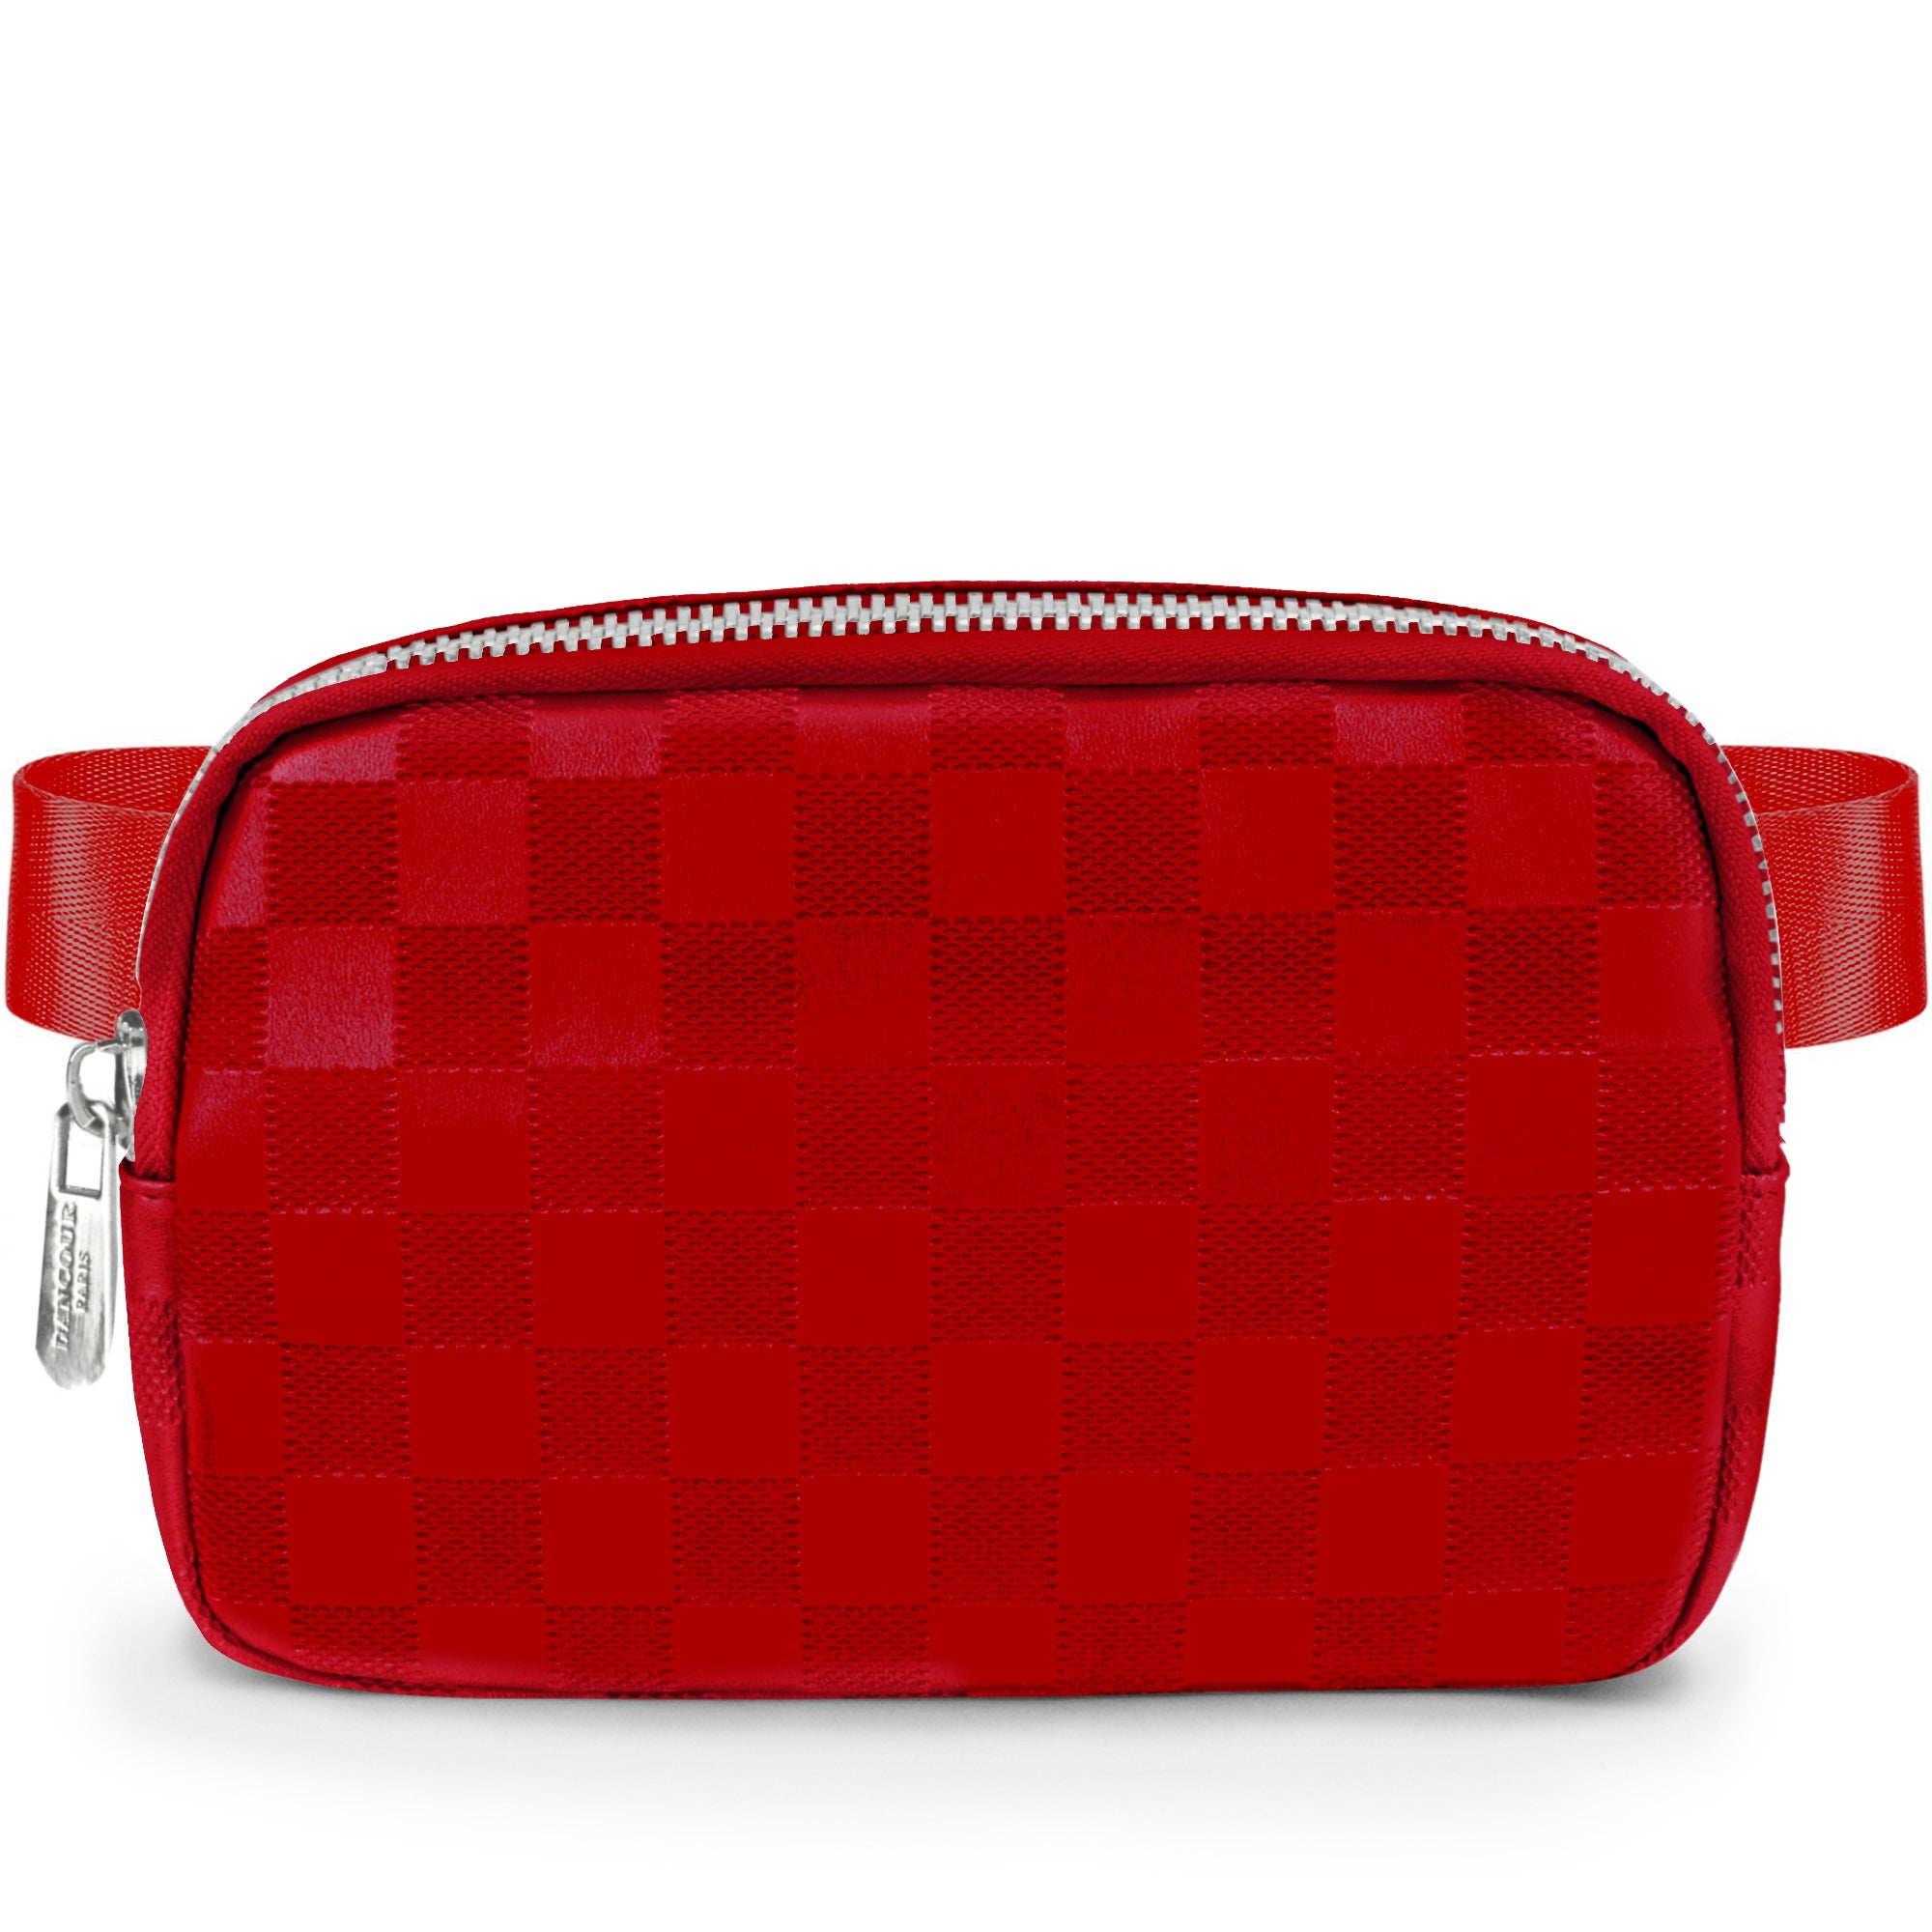 red belt bag for girls red fanny pack for women teens leather bum bag fanny packs for women fashionable bum bags belt purse for women crossbody belt bag bum bags for women crossbody fanny pack crossbody bags for women stylish fanny packs for women beltbag fashion fanny packs for women crossbody fanny bags for women checkered fanny pack for women checkered belt bag for girls